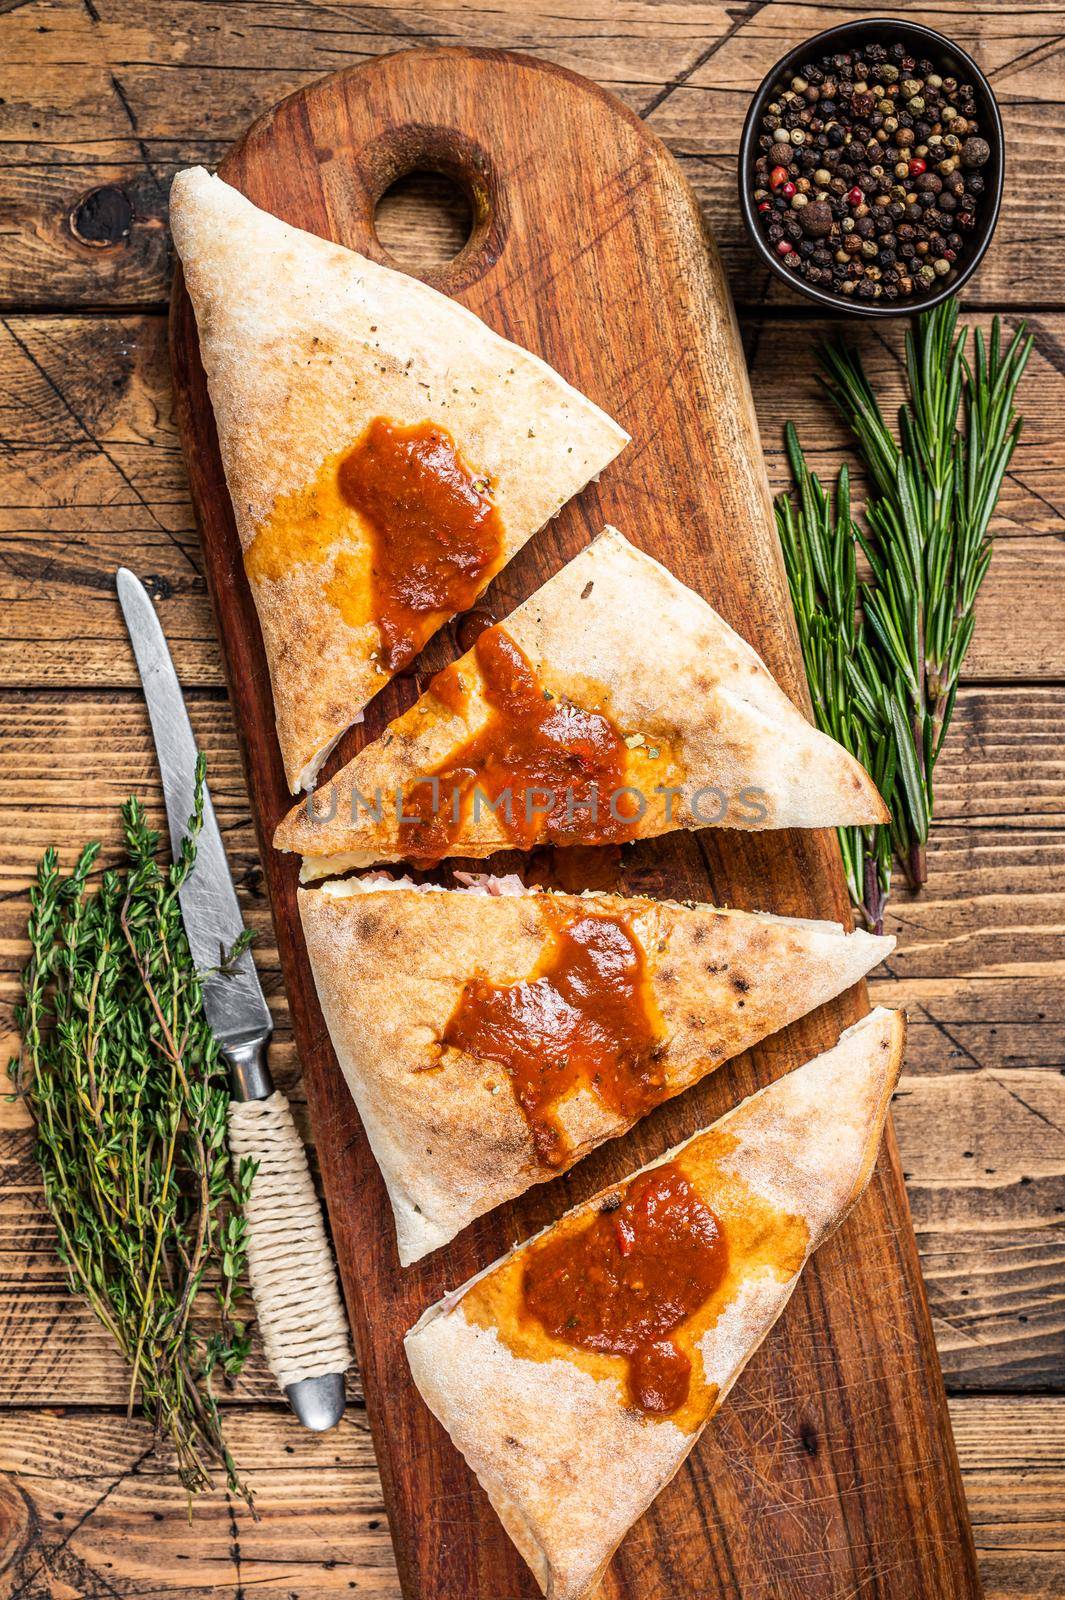 Cut and sliced Calzone closed pizza with ham and cheese on wooden board with hot tomato sauce. wooden background. Top view.